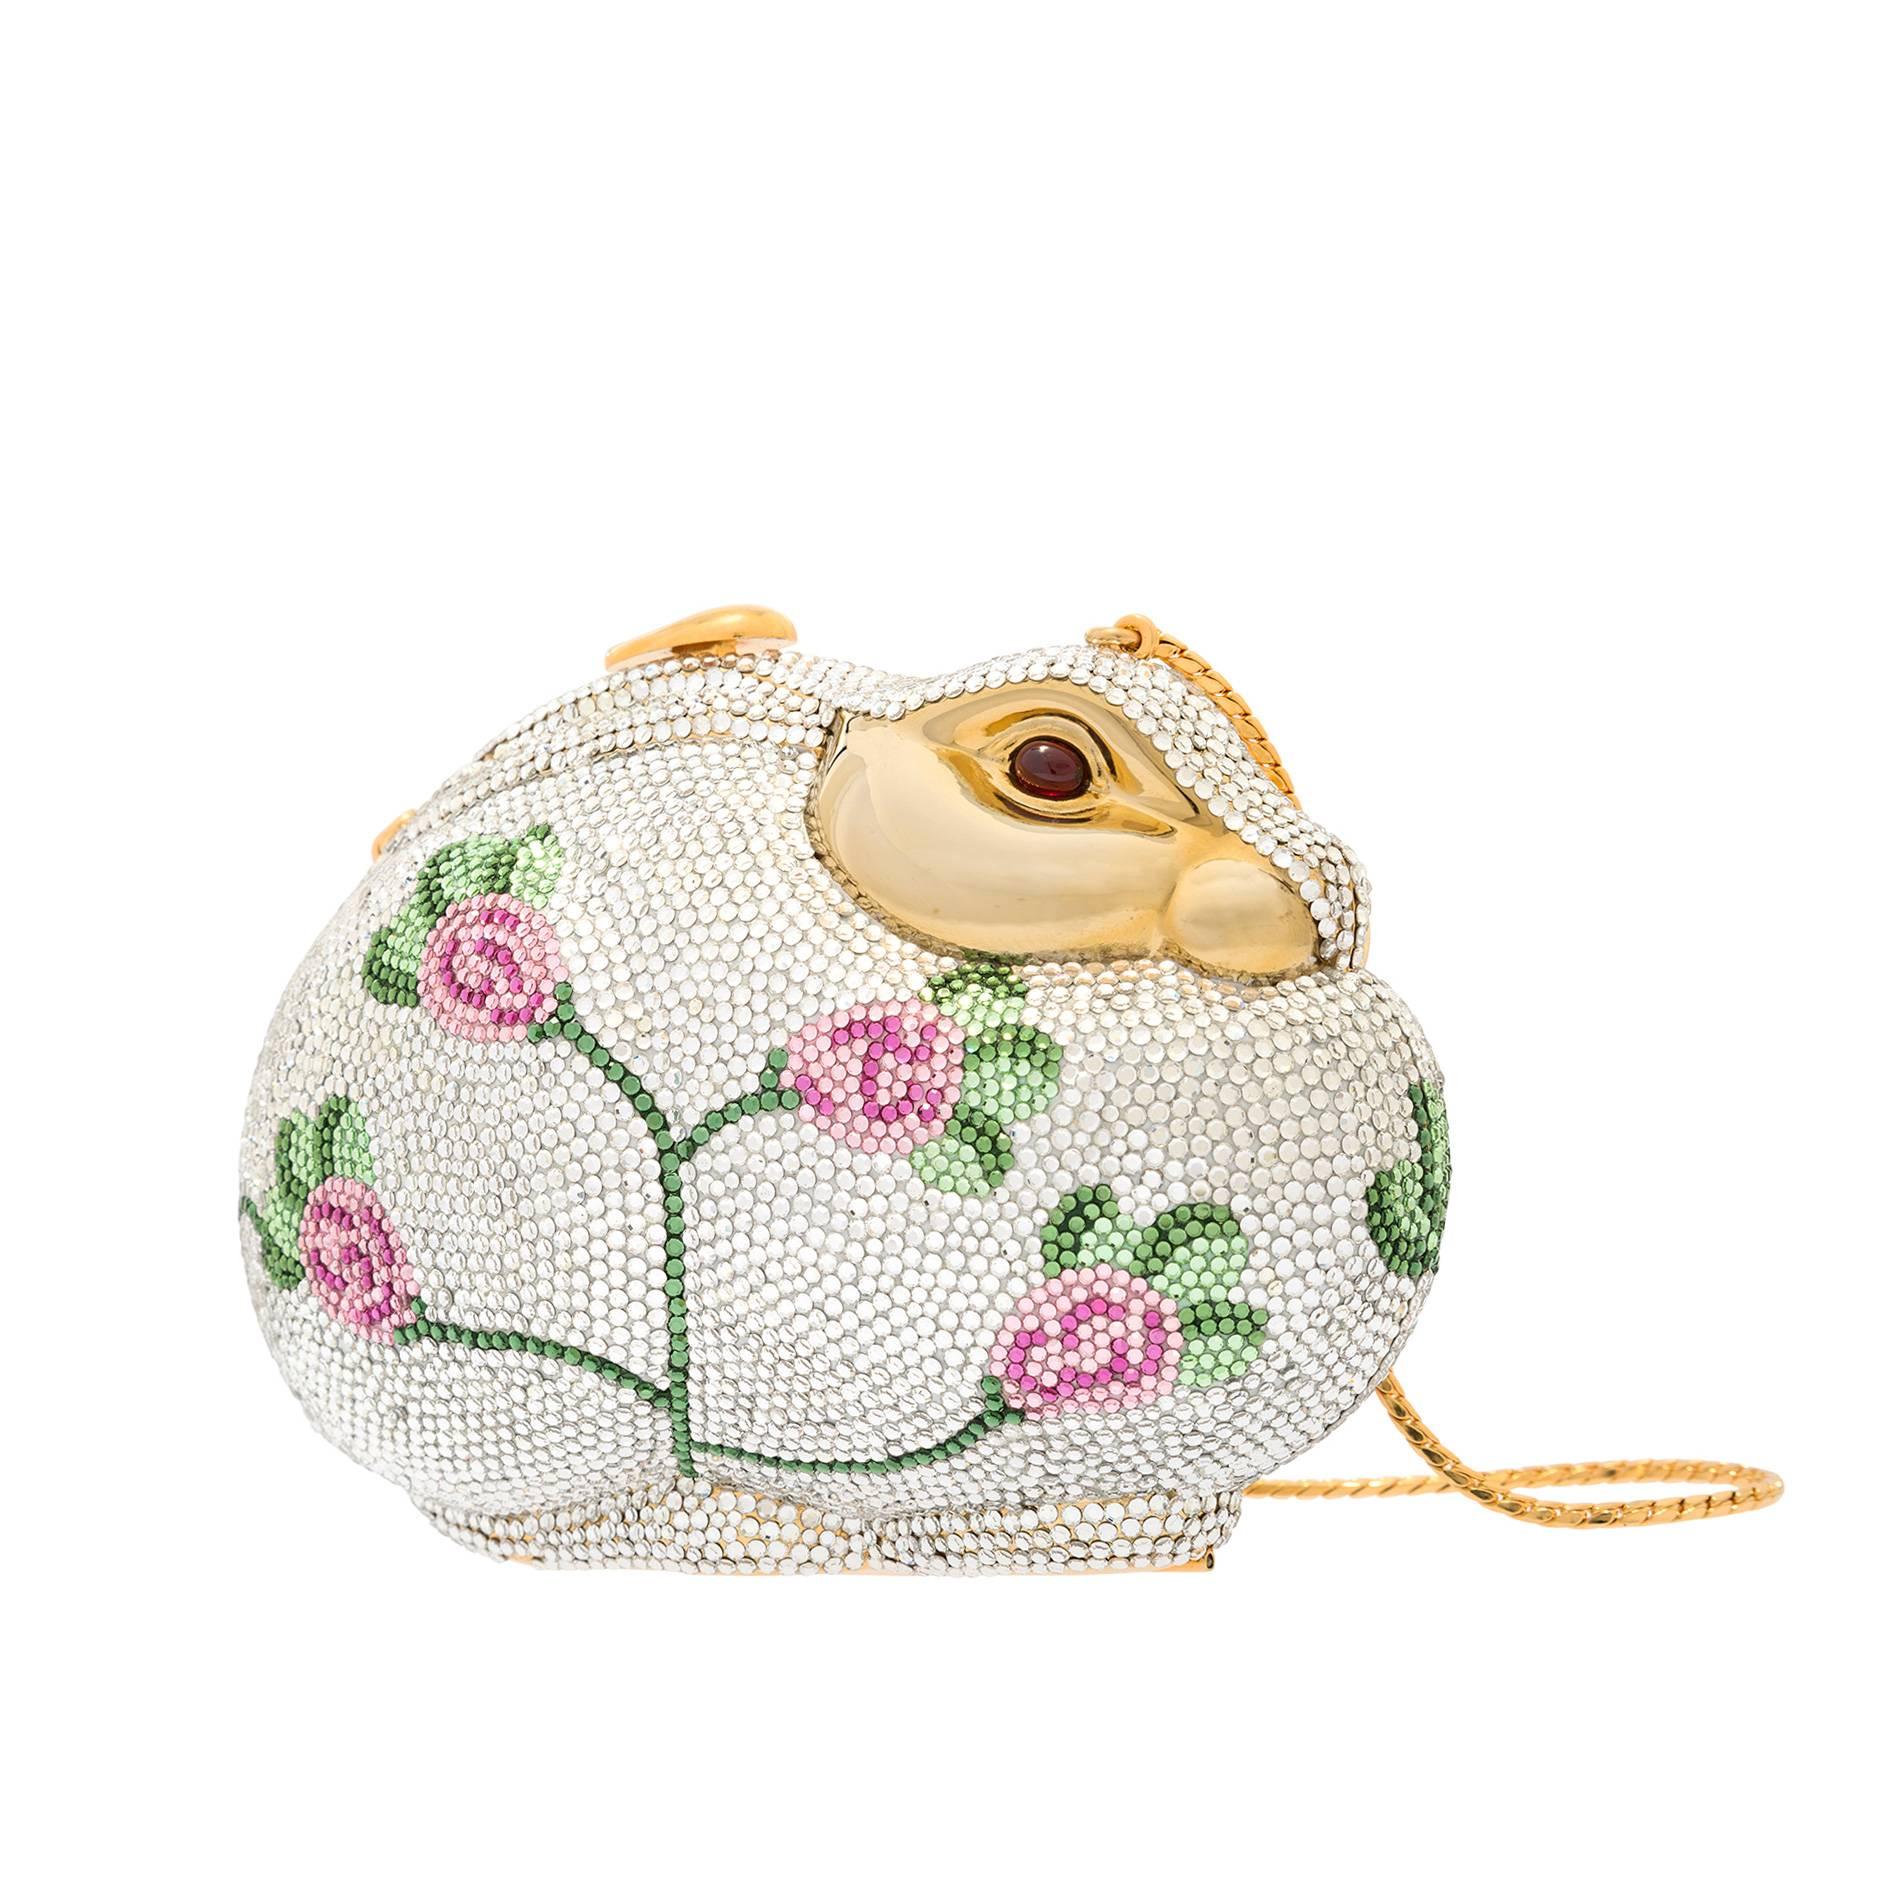 Judith Leiber Full Bead Pink & Green Crystal Floral Rabbit Minaudiere Bag For Sale